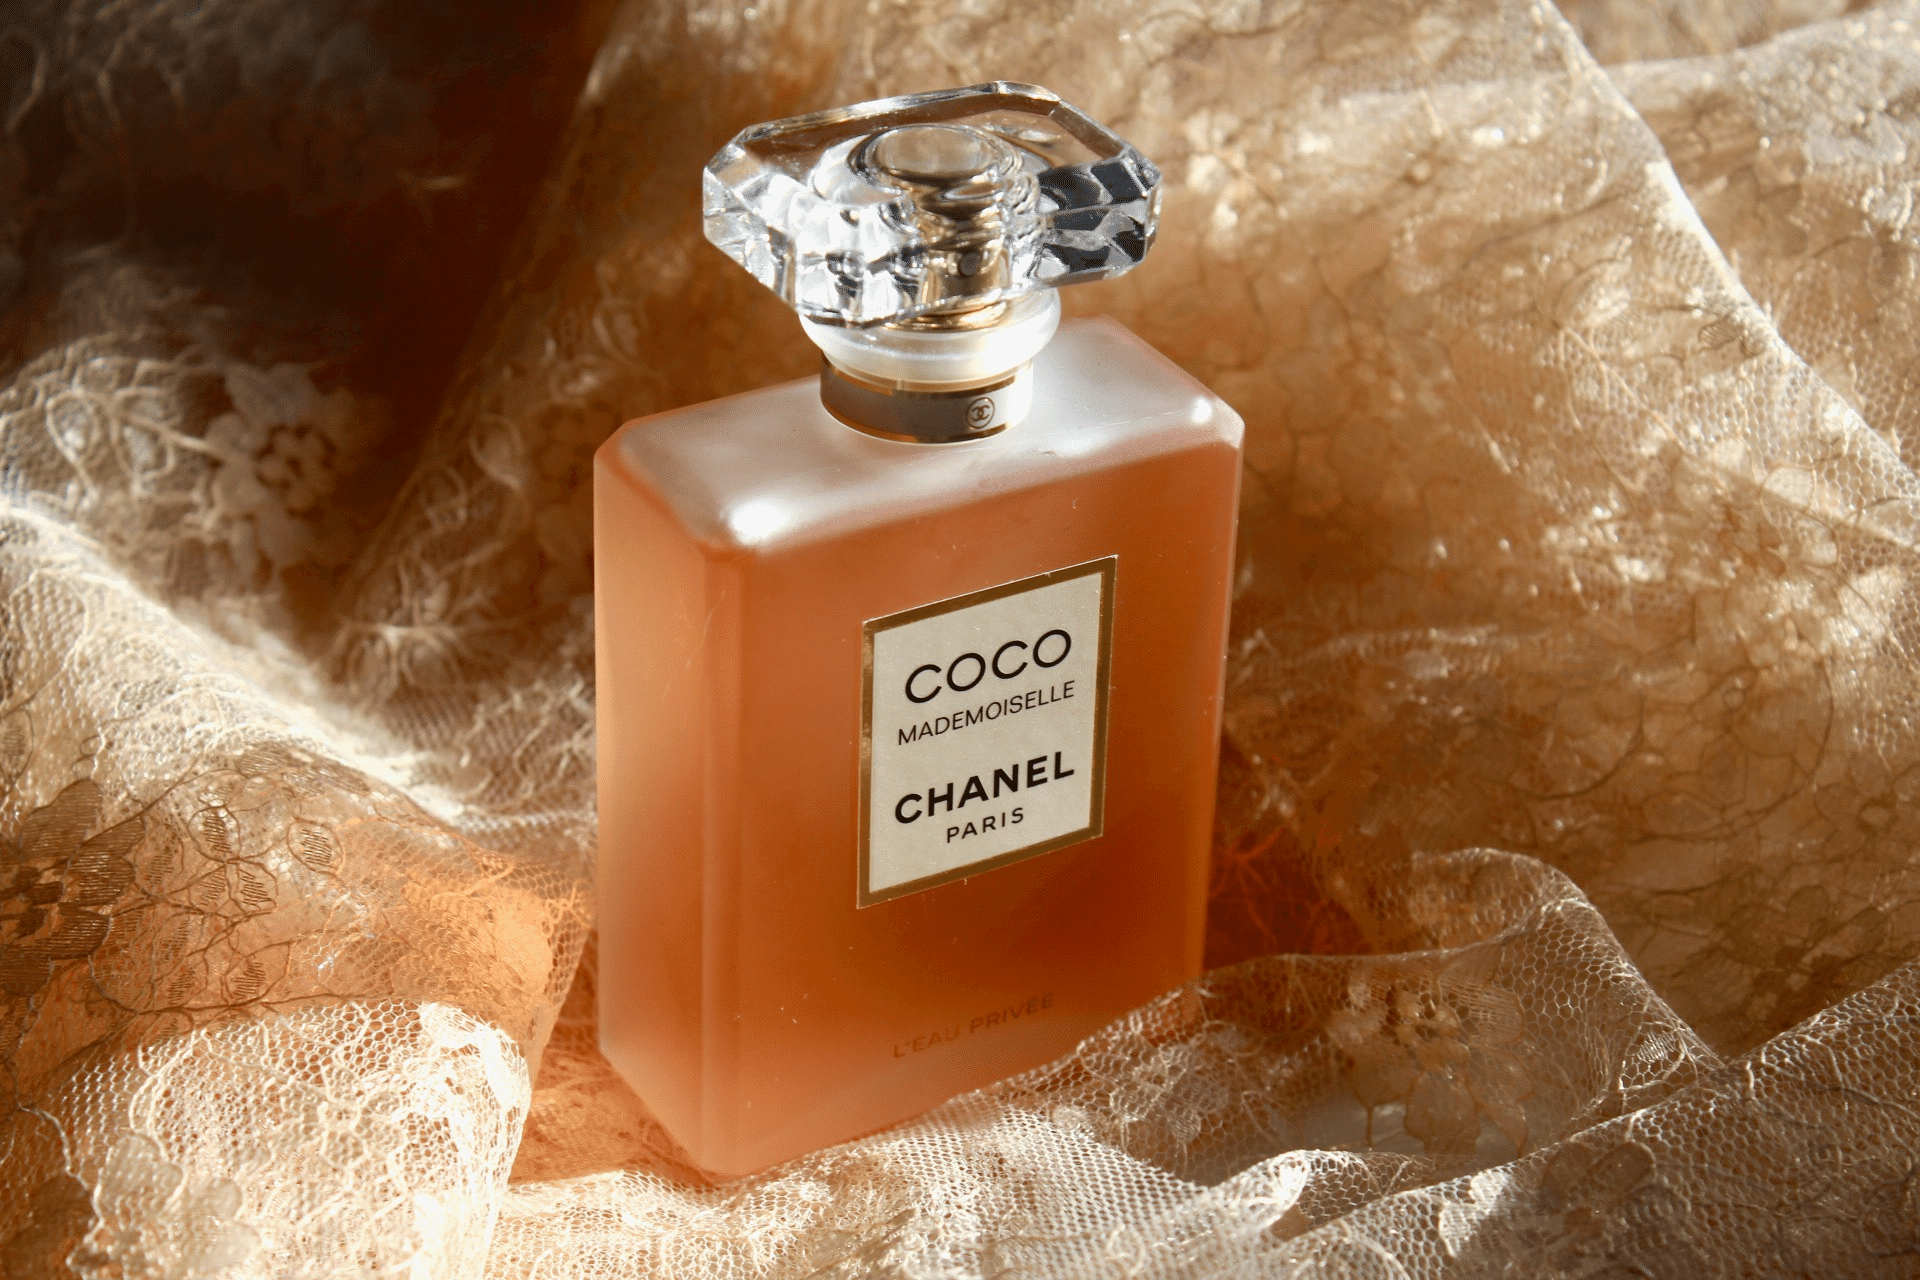 coco mademoiselle chanel